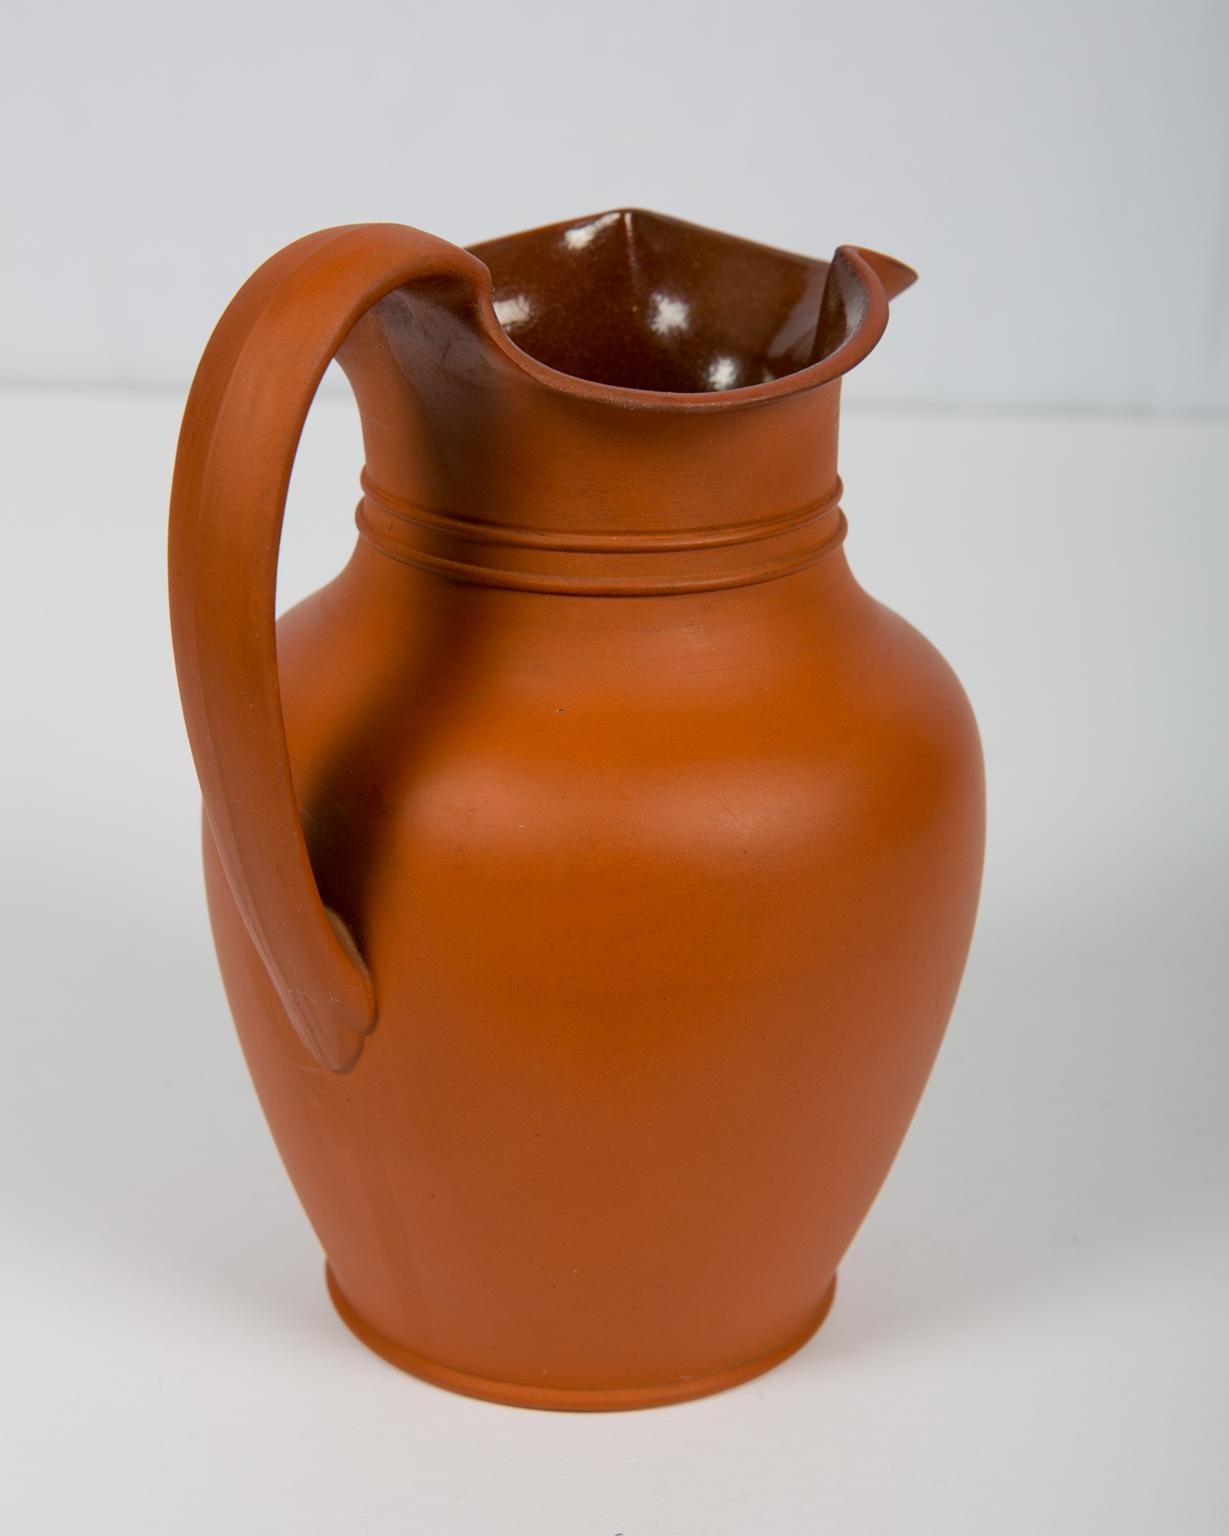 Rustic Antique Wedgwood Pitcher Rosso Antico, Mid-19th Century